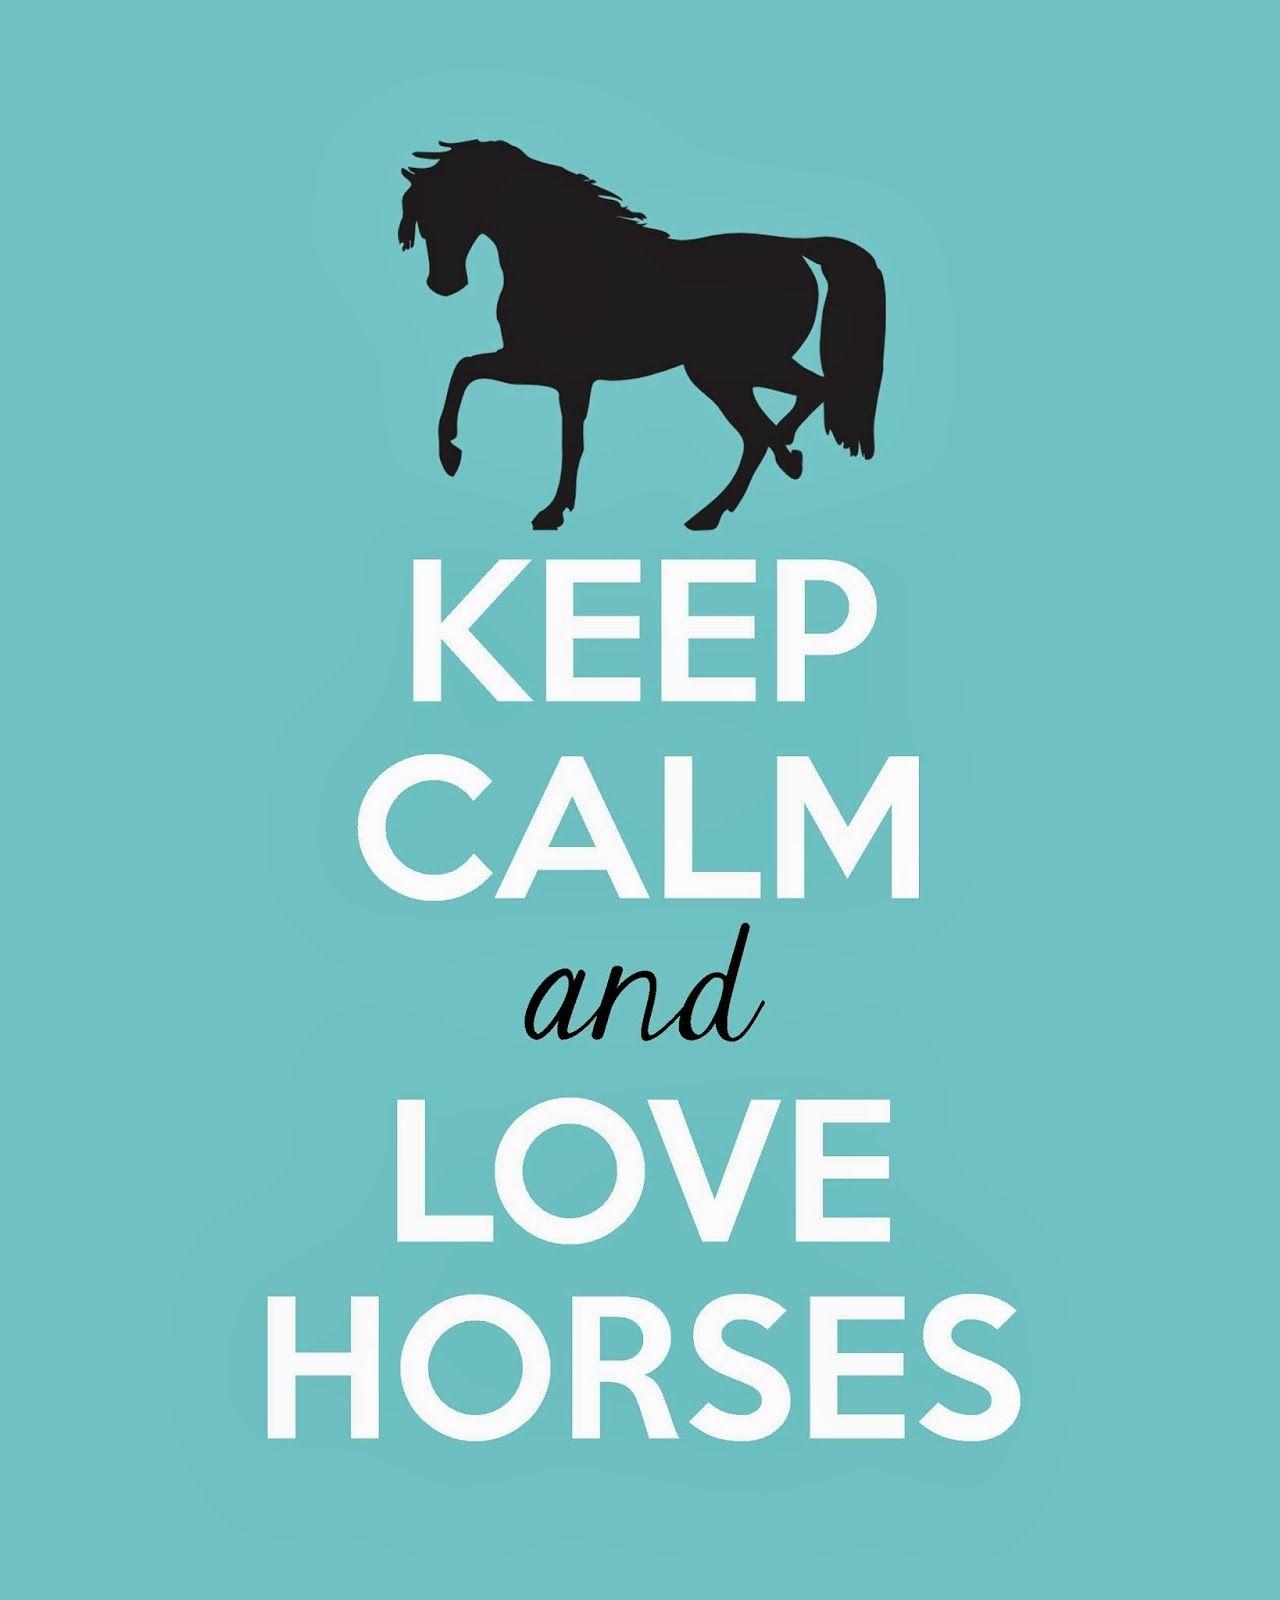 Full of Great Ideas: Keep Calm and Love Horses